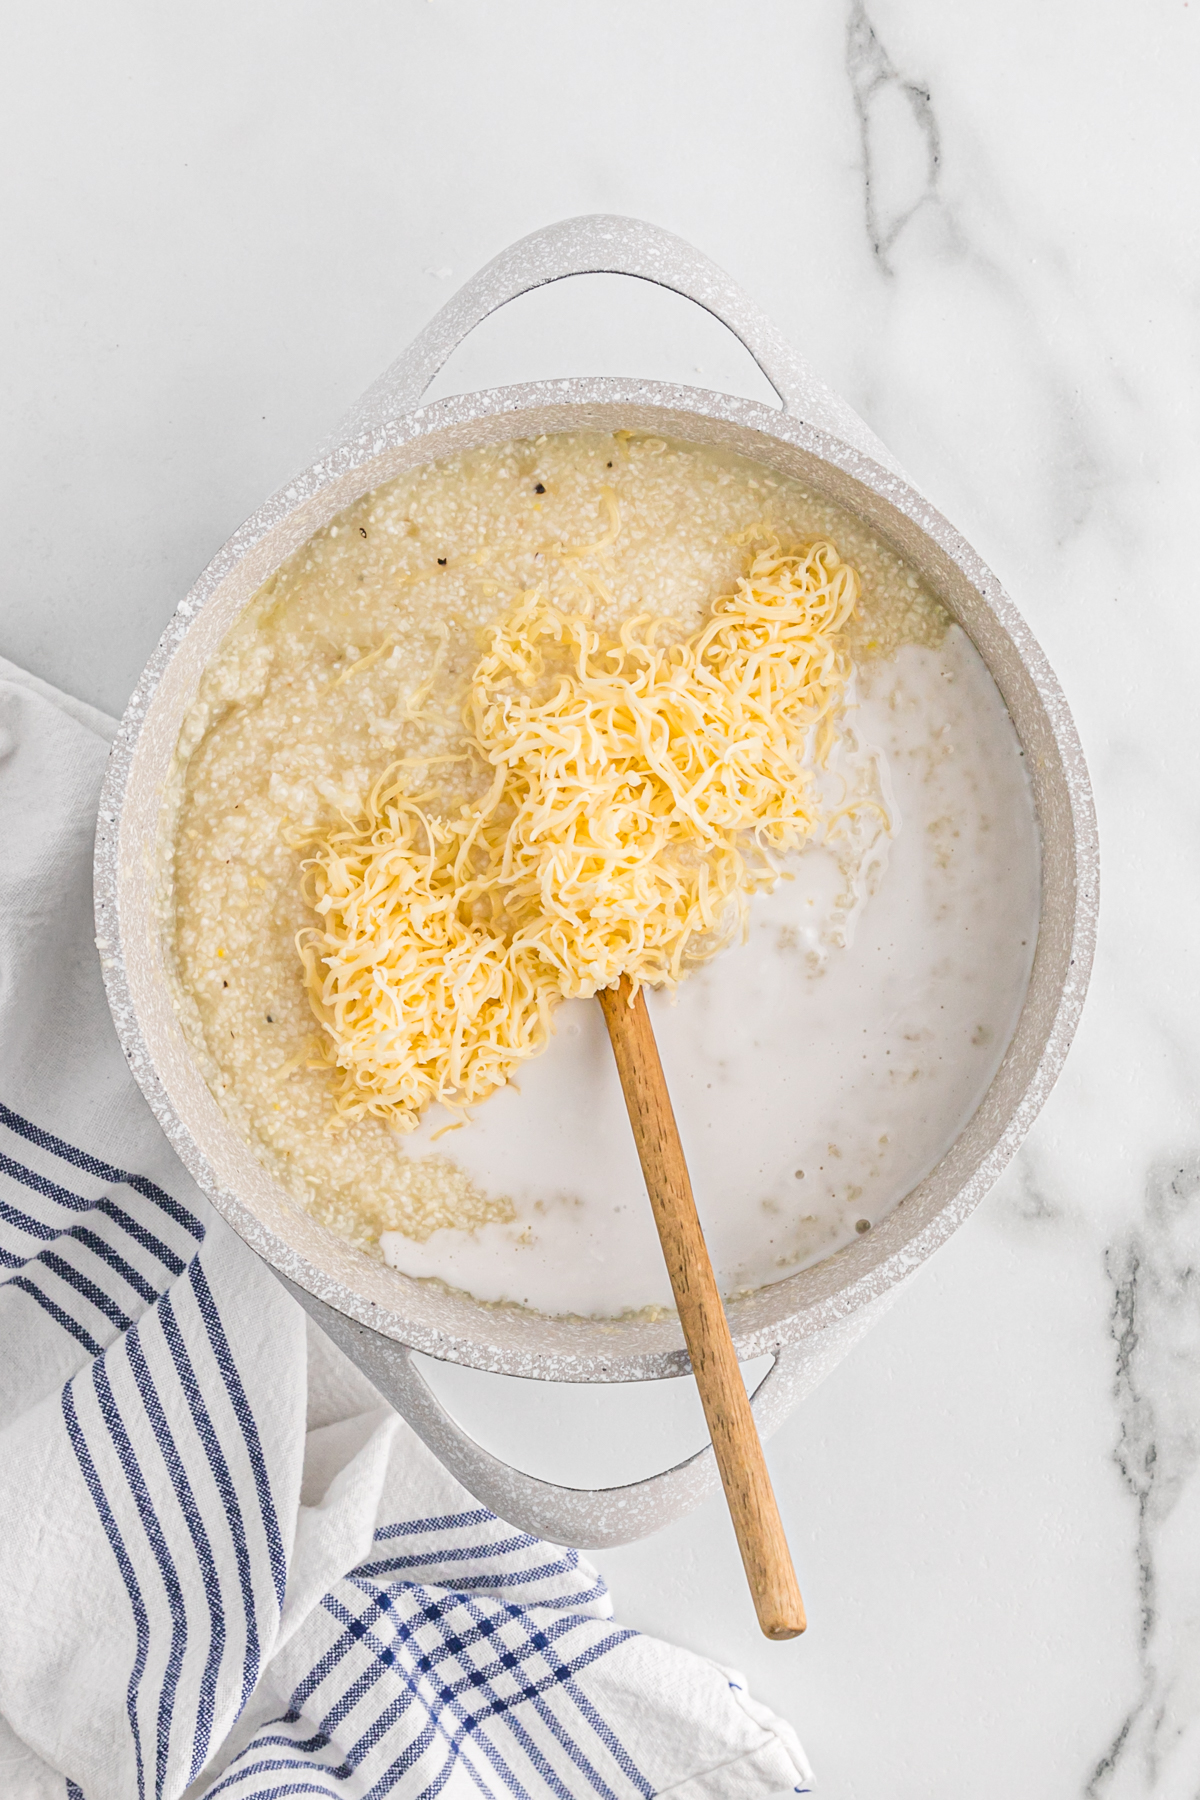 Shredded gouda and dry grits added to a pot of hot milk.